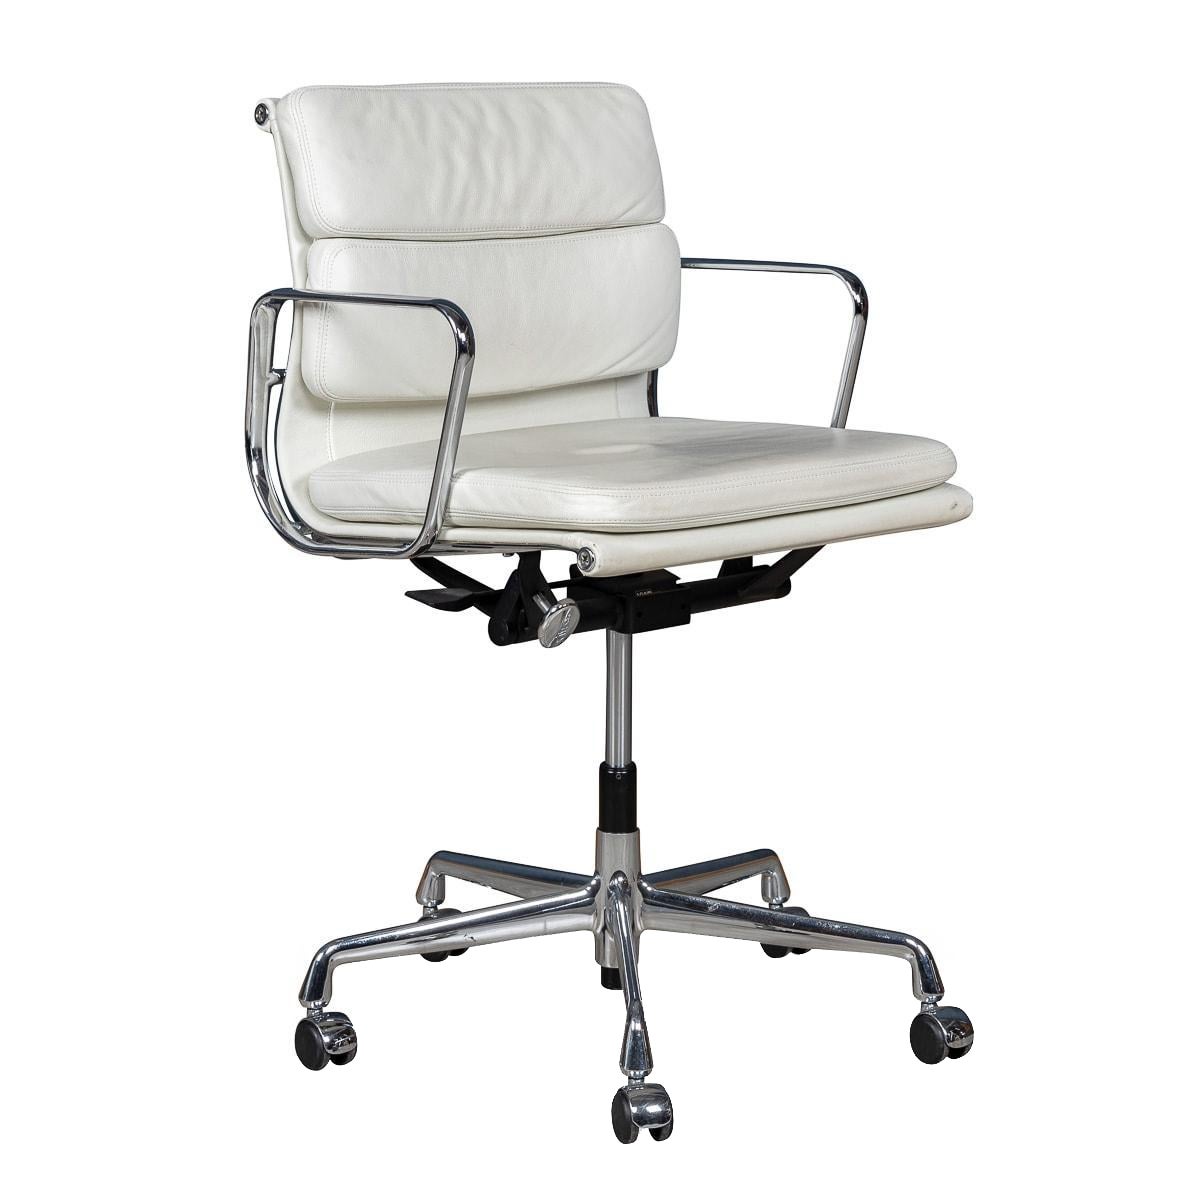 Stunning EA217 Eames Chair In "White Snow" Leather By Vitra For Sale